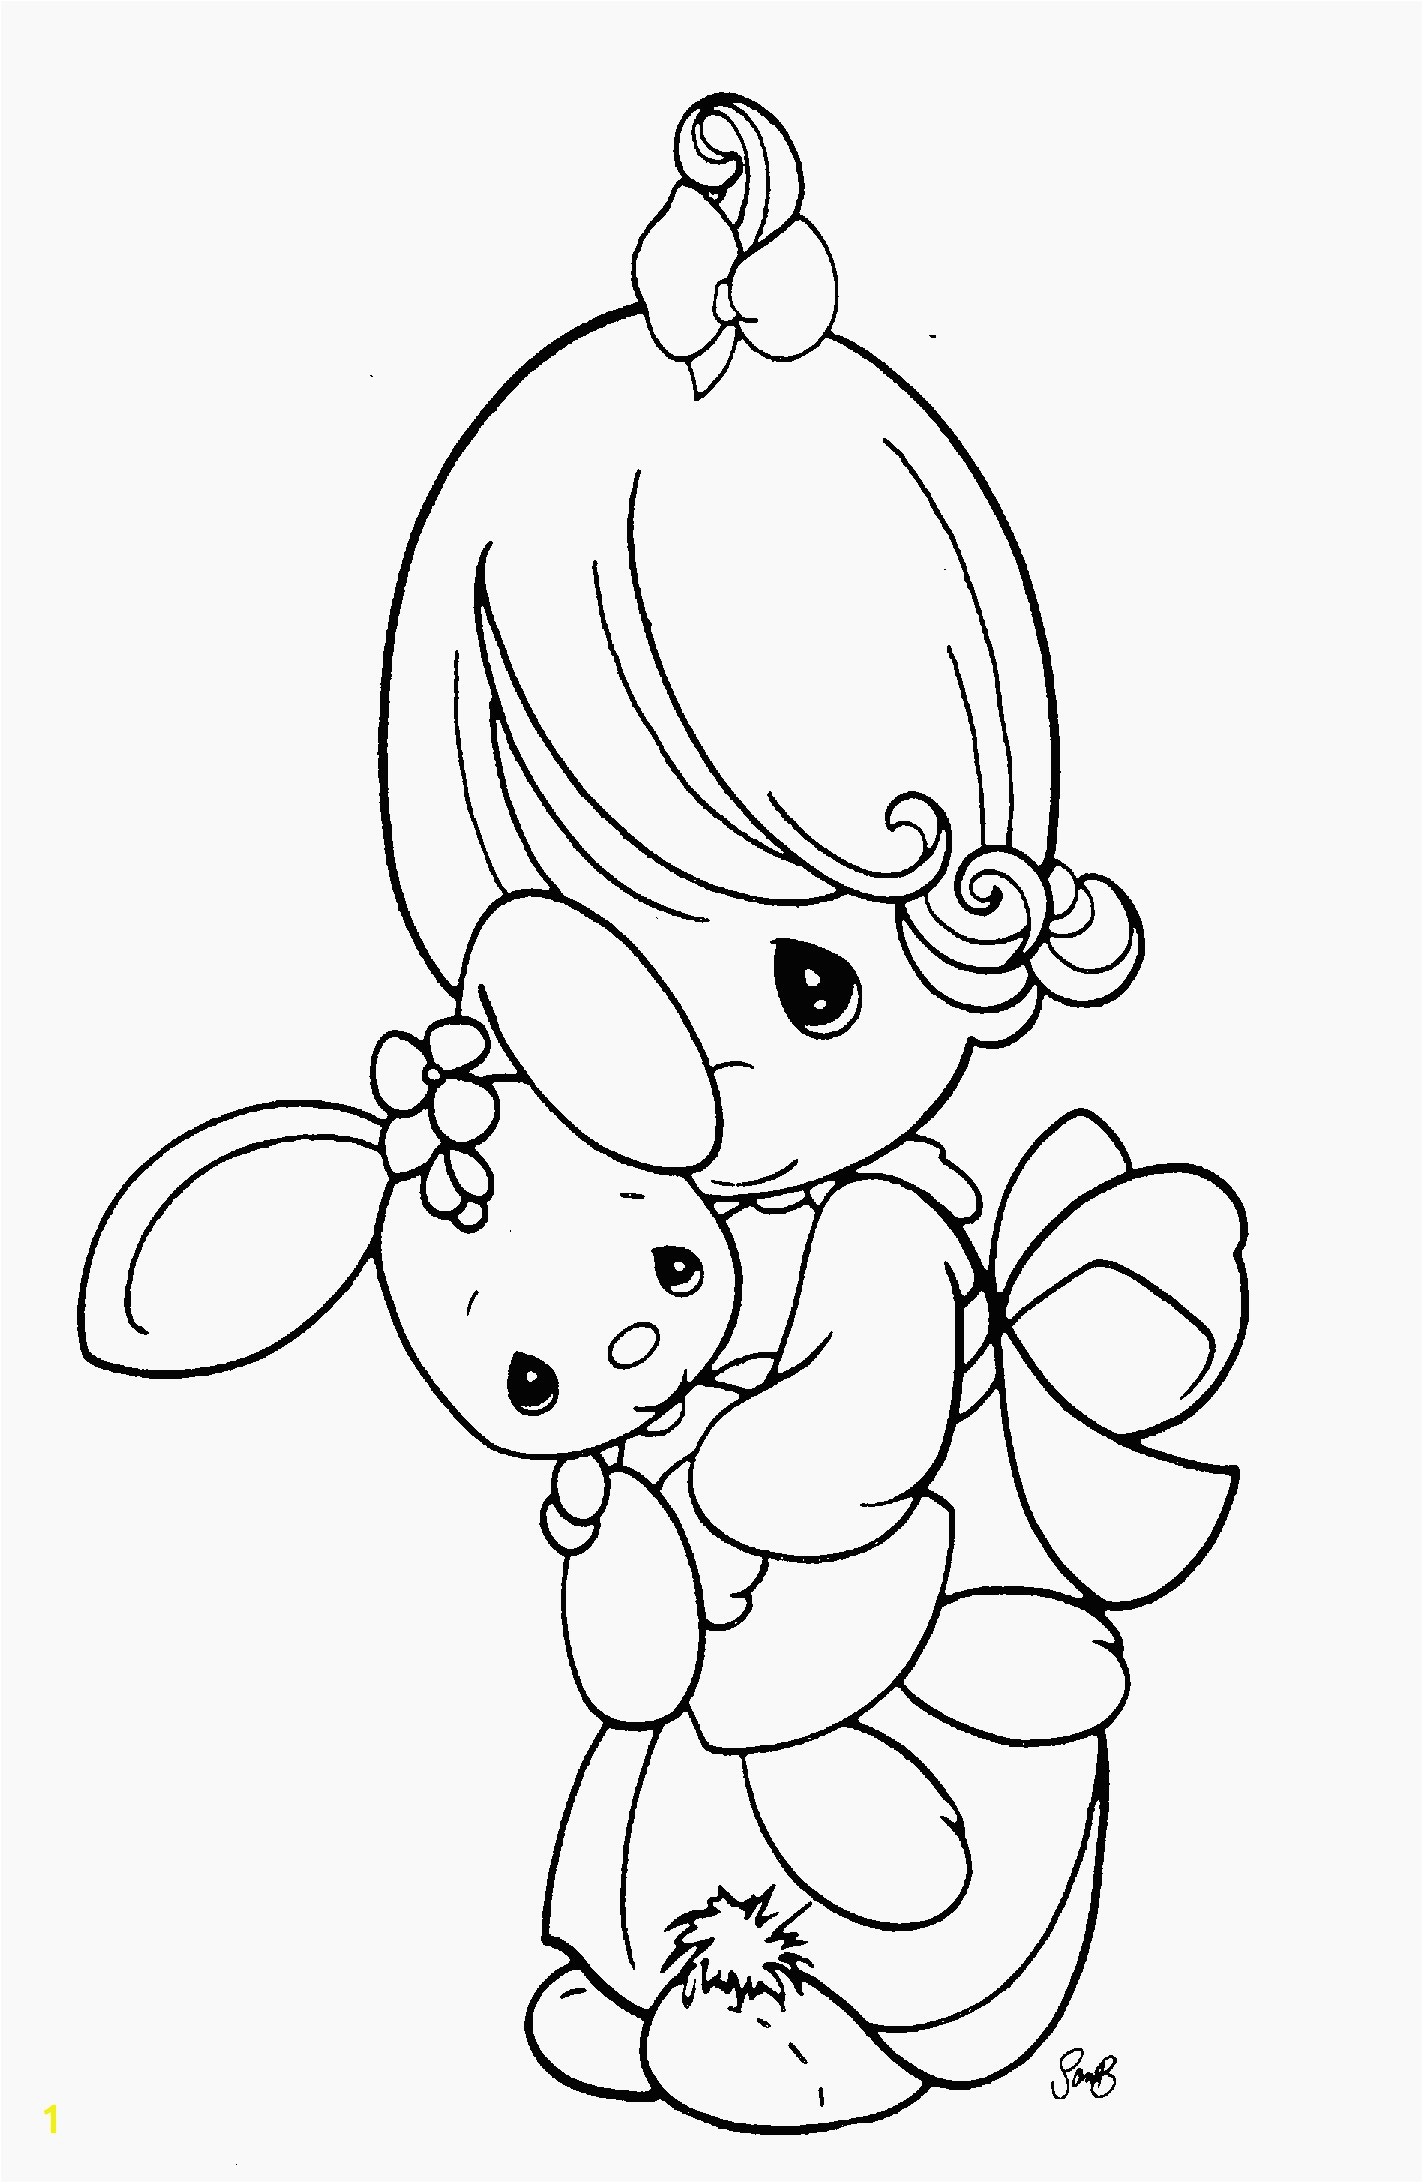 Free Printable Precious Moments Coloring Pages Inspirational Precious Moments Angel Drawing at Getdrawings Free for